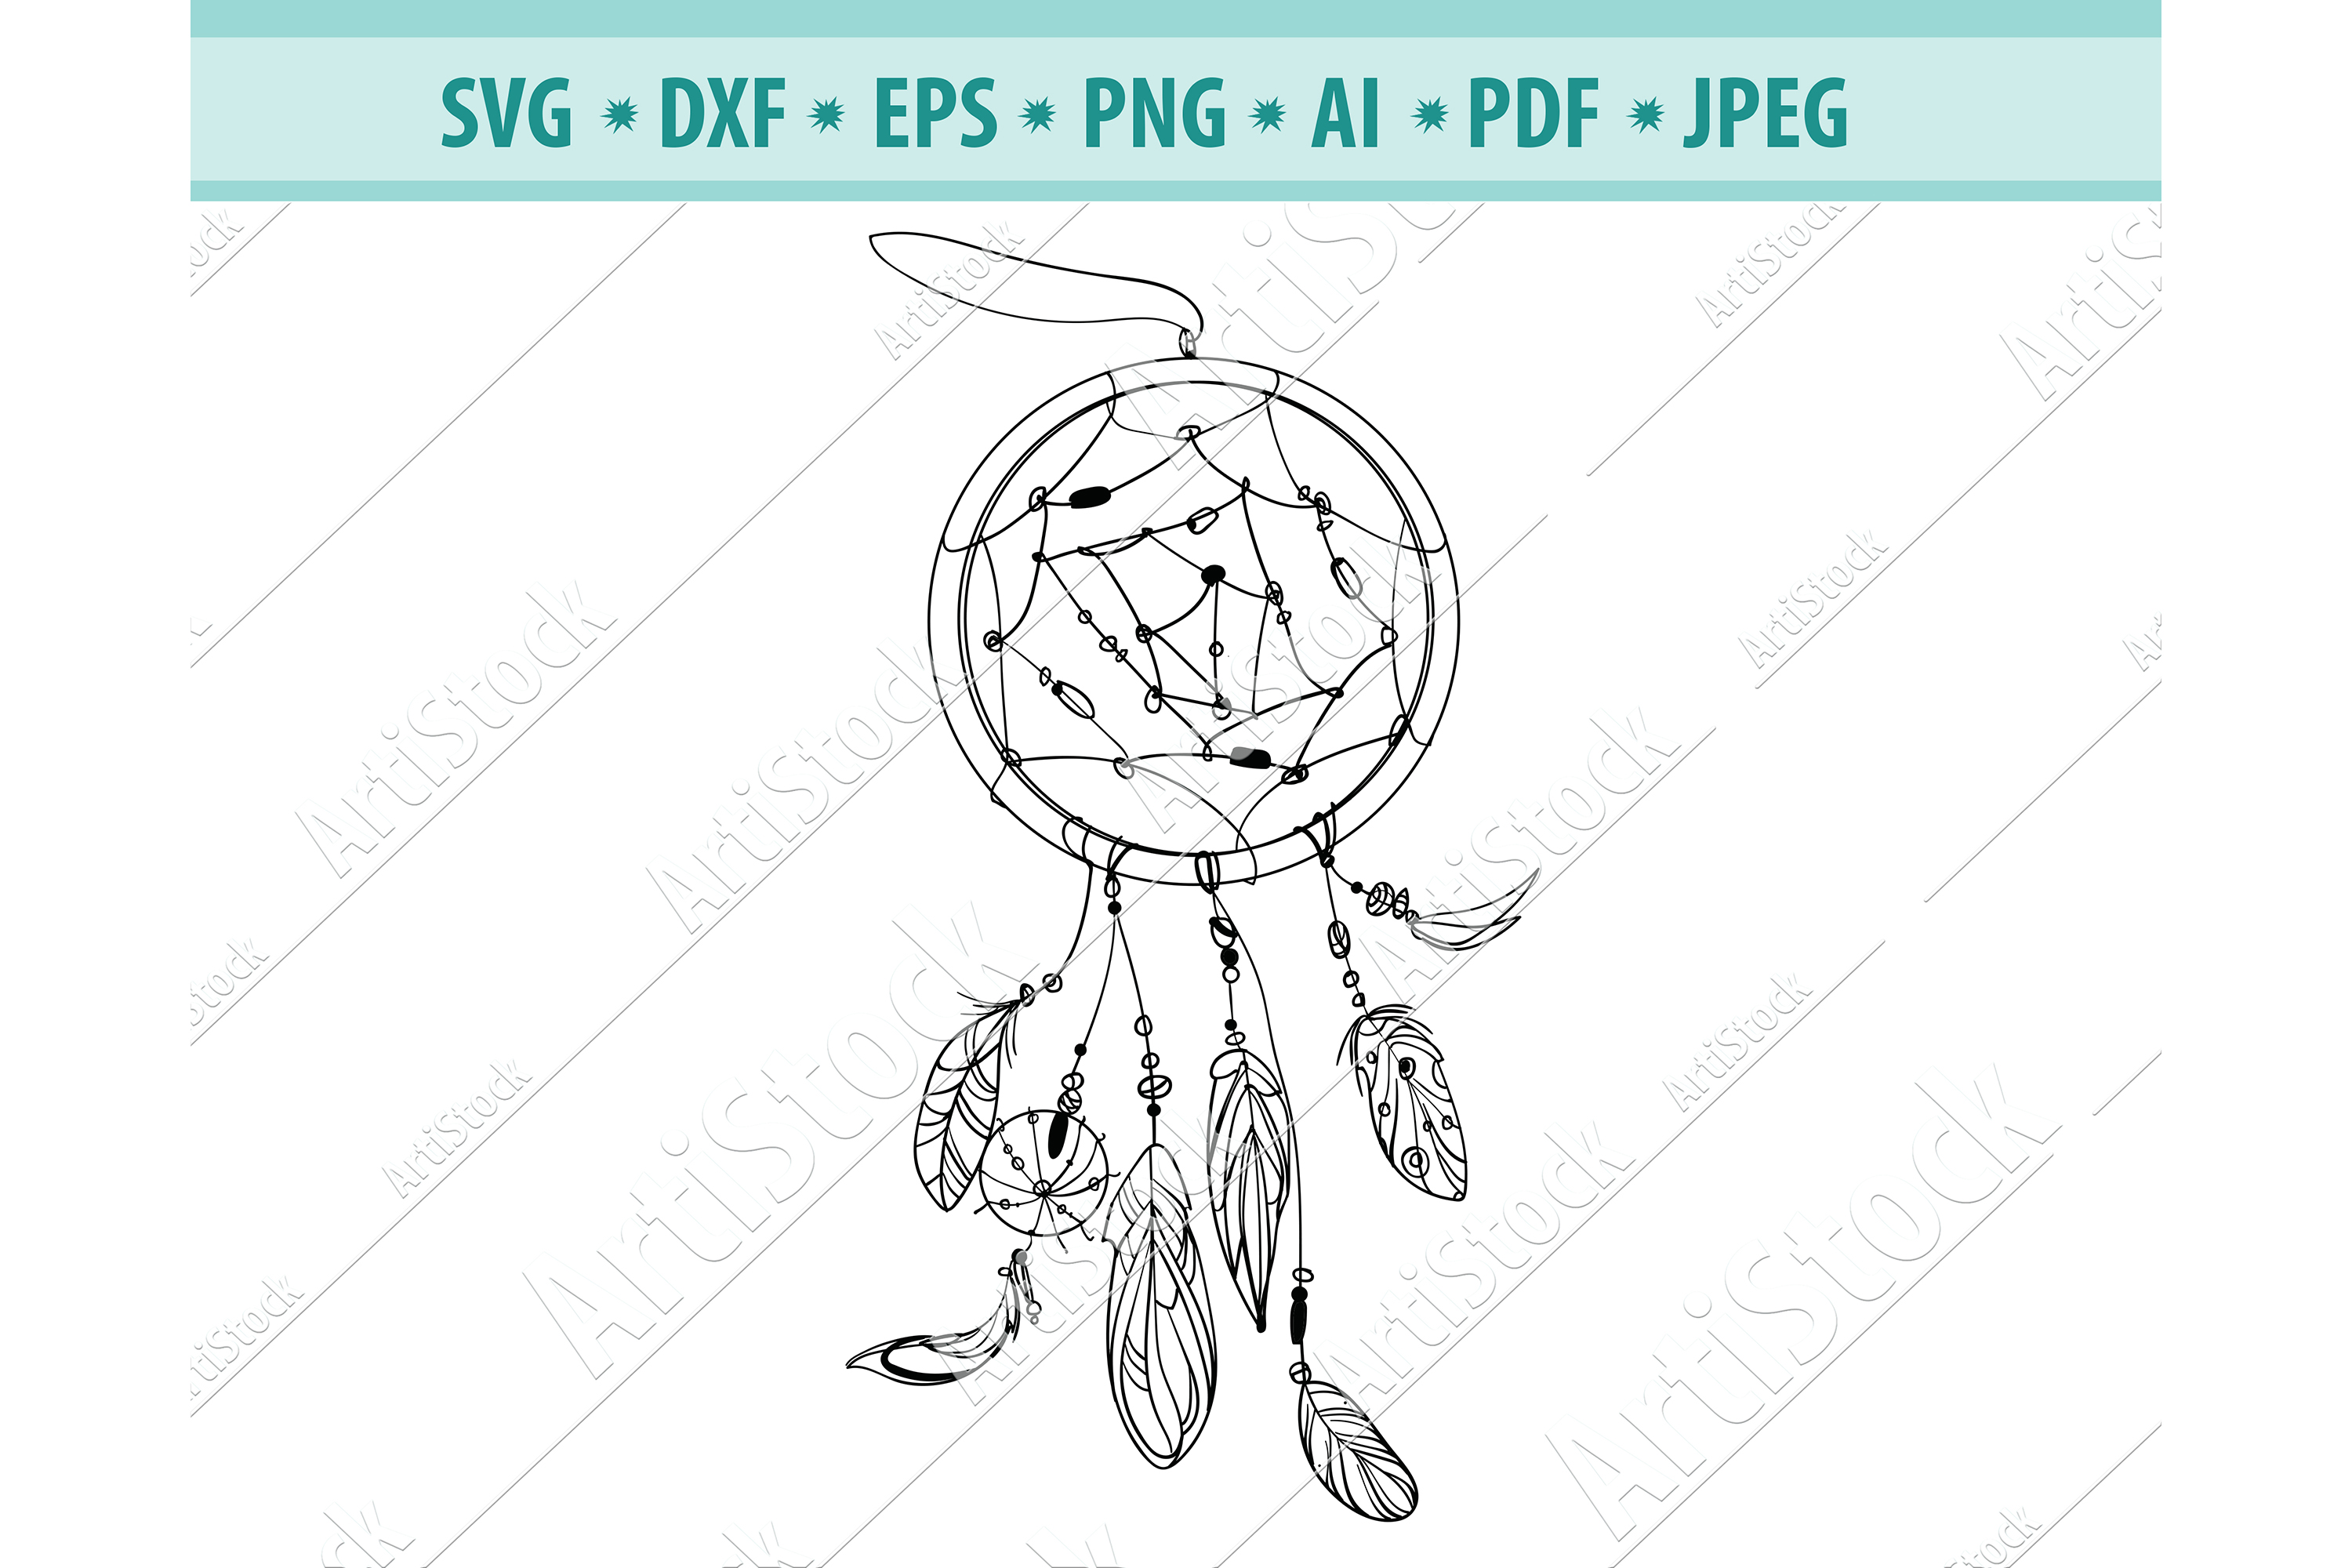 Dream Catcher Svg, Boho Feathers Vector Svg, Dxf, Png, Eps